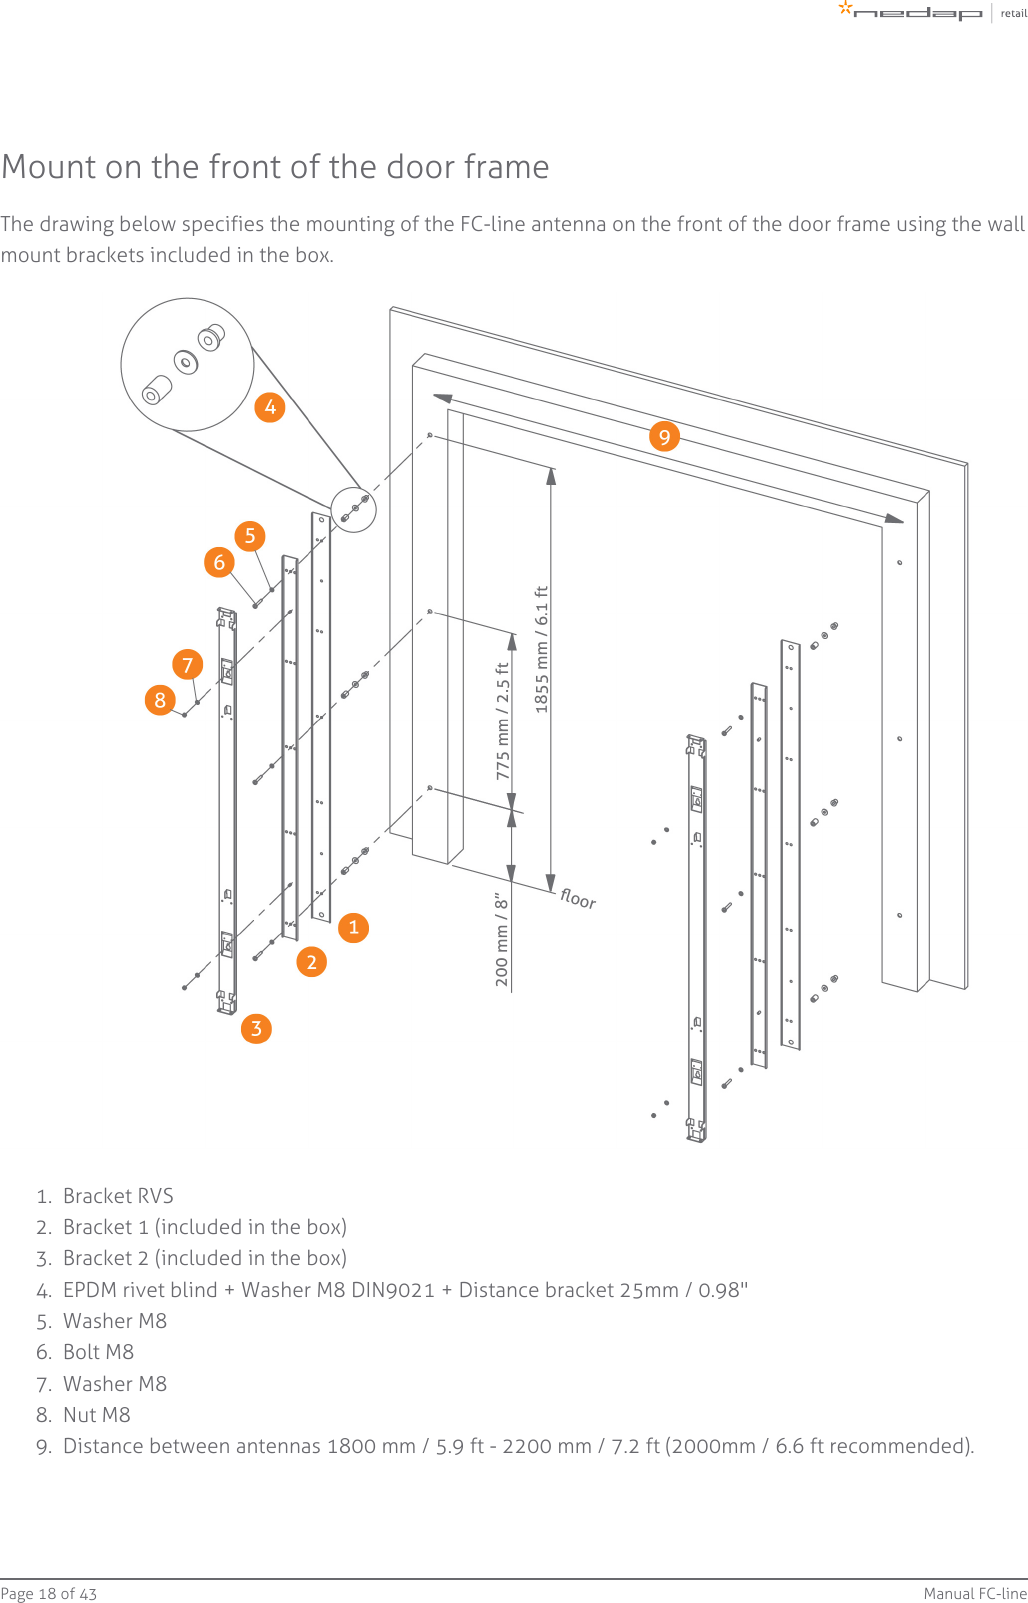 Page   of 18 43 Manual FC-line1.  2.  3.  4.  5.  6.  7.  8.  9.  Mount on the front of the door frameThe drawing below specifies the mounting of the FC-line antenna on the front of the door frame using the wallmount brackets included in the box.Bracket RVSBracket 1 (included in the box)Bracket 2 (included in the box)EPDM rivet blind + Washer M8 DIN9021 + Distance bracket 25mm / 0.98&quot;Washer M8Bolt M8Washer M8Nut M8Distance between antennas 1800 mm / 5.9 ft - 2200 mm / 7.2 ft (2000mm / 6.6 ft recommended).